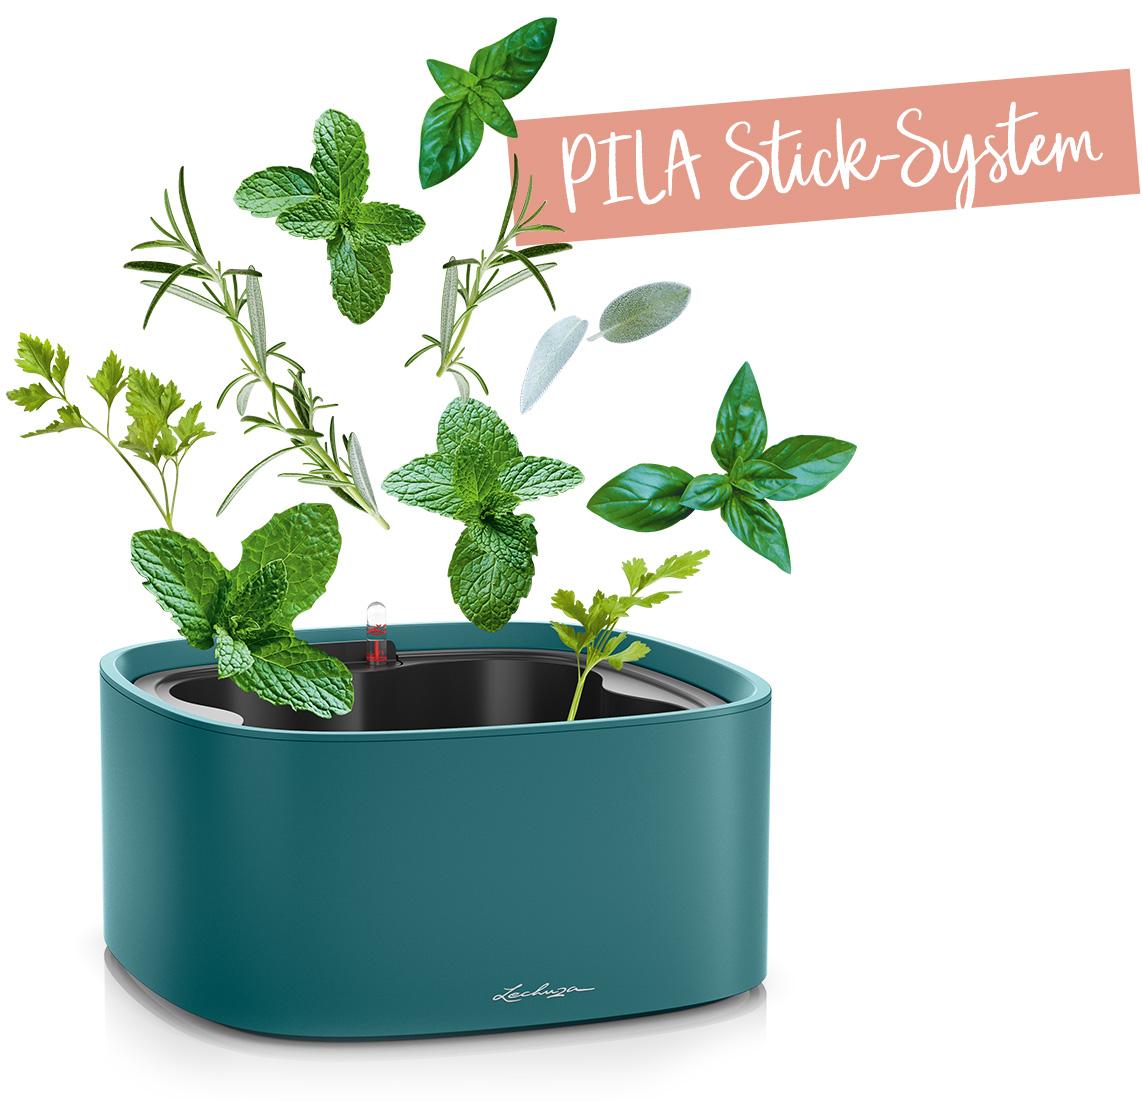 PILA stick system recommended for herbs